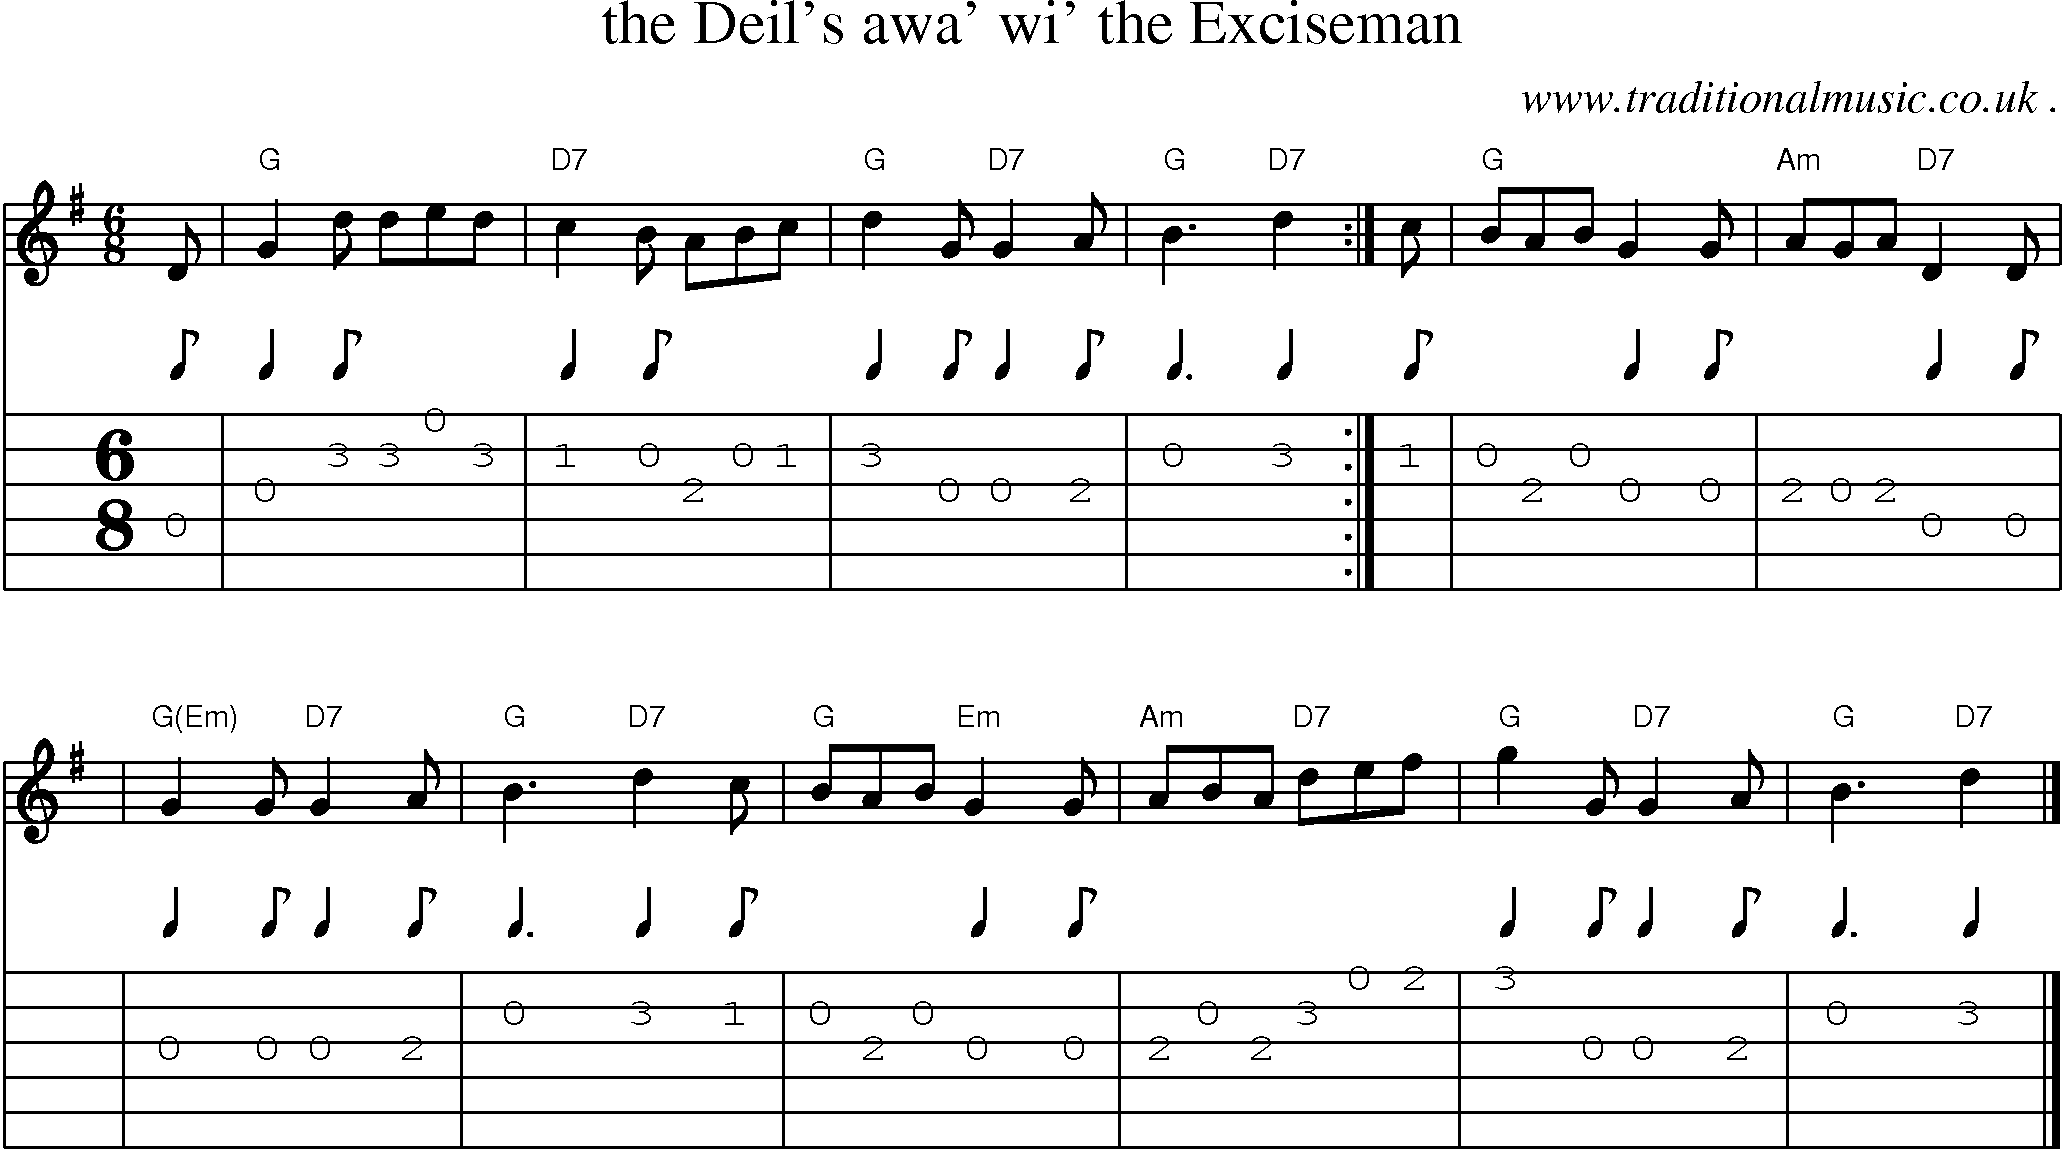 Sheet-music  score, Chords and Guitar Tabs for The Deils Awa Wi The Exciseman